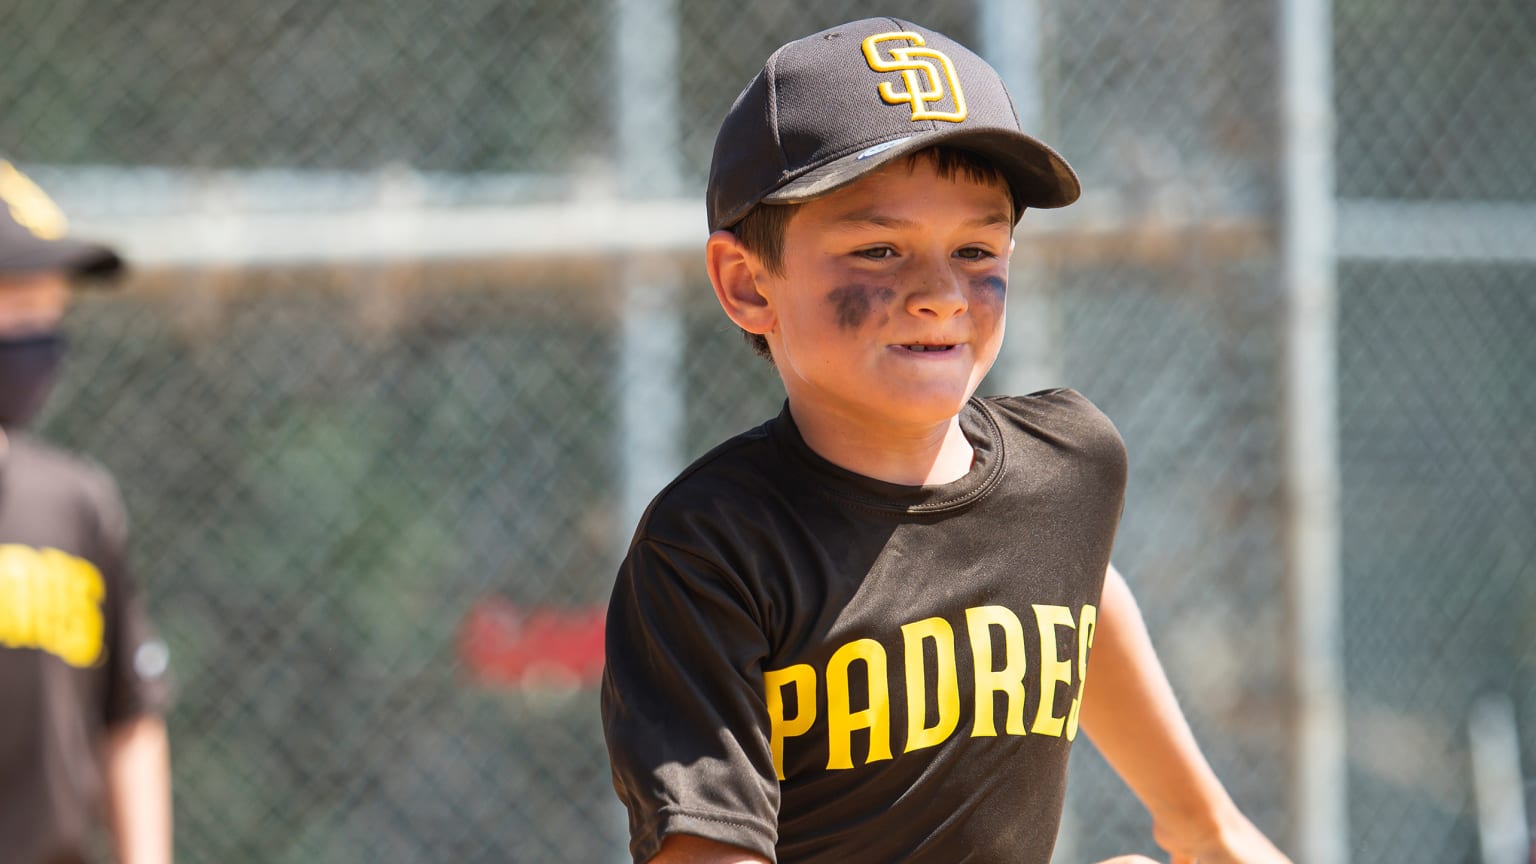 San Diego Padres outfitting Little Leaguers in authentic uniforms - ESPN